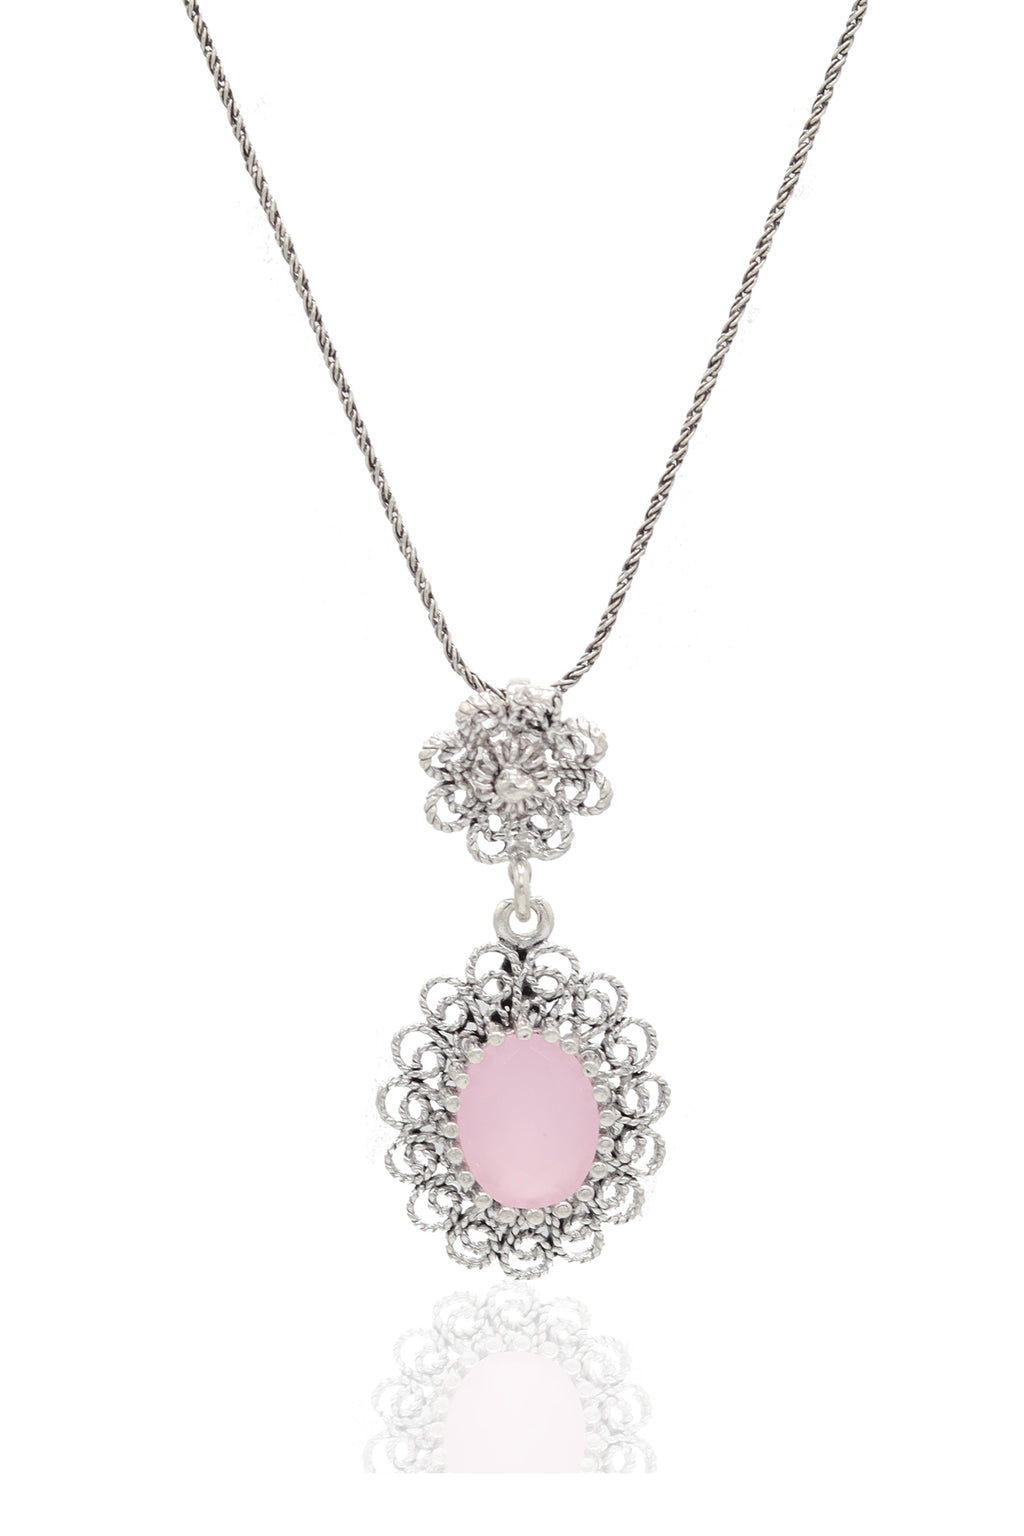 Ellipse Model Authentic Filigree Silver Necklace With Quartz (NG201021960)